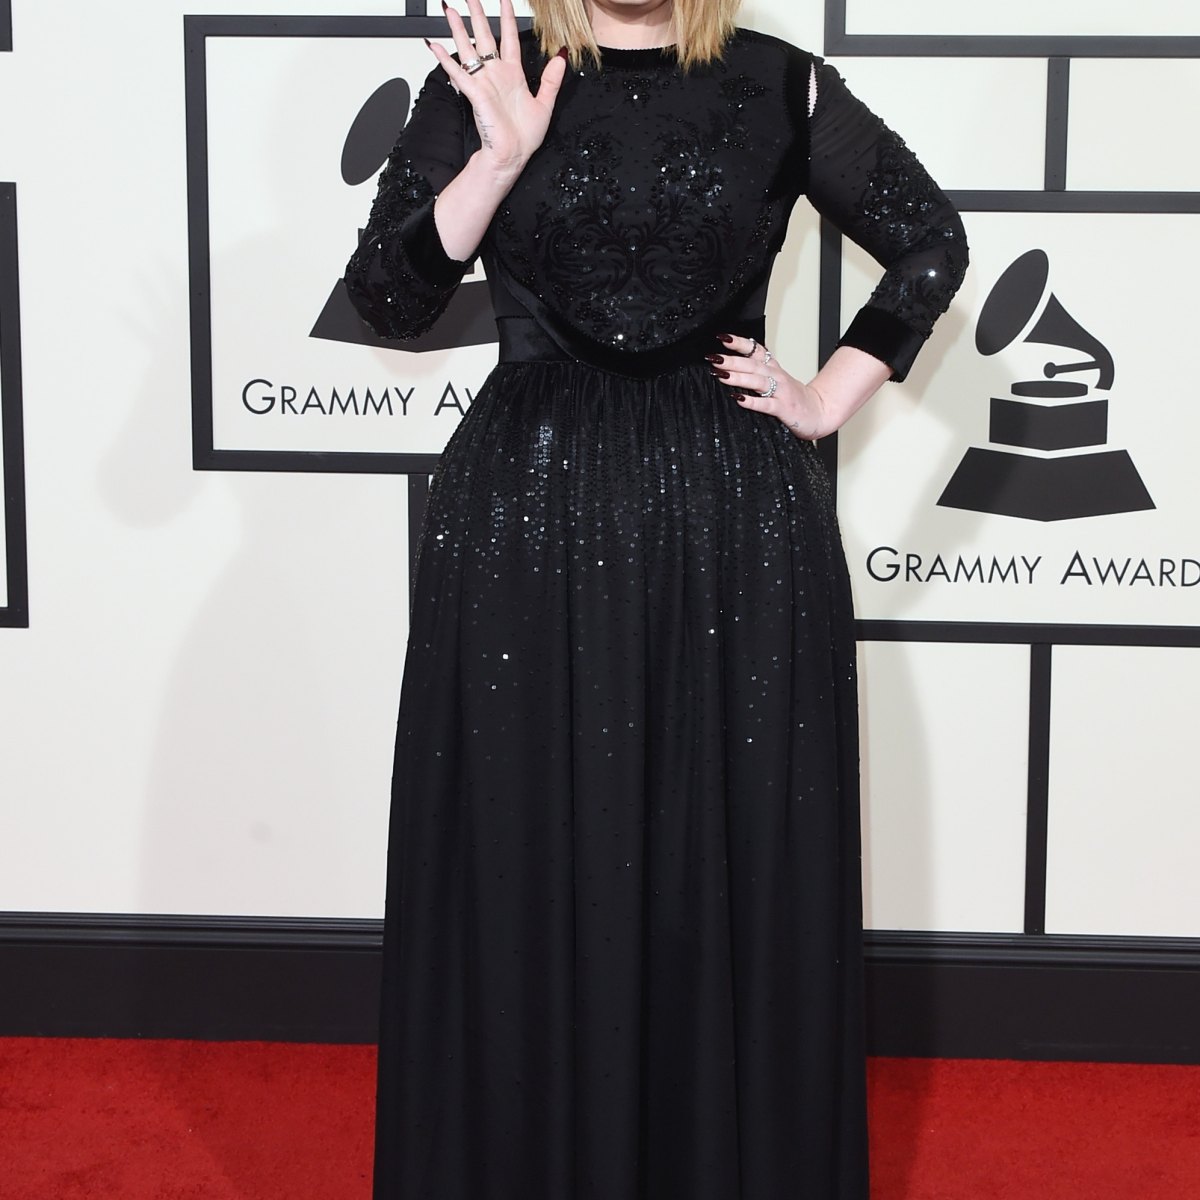 Grammys 2017: Adele Wears Givenchy to the Red Carpet